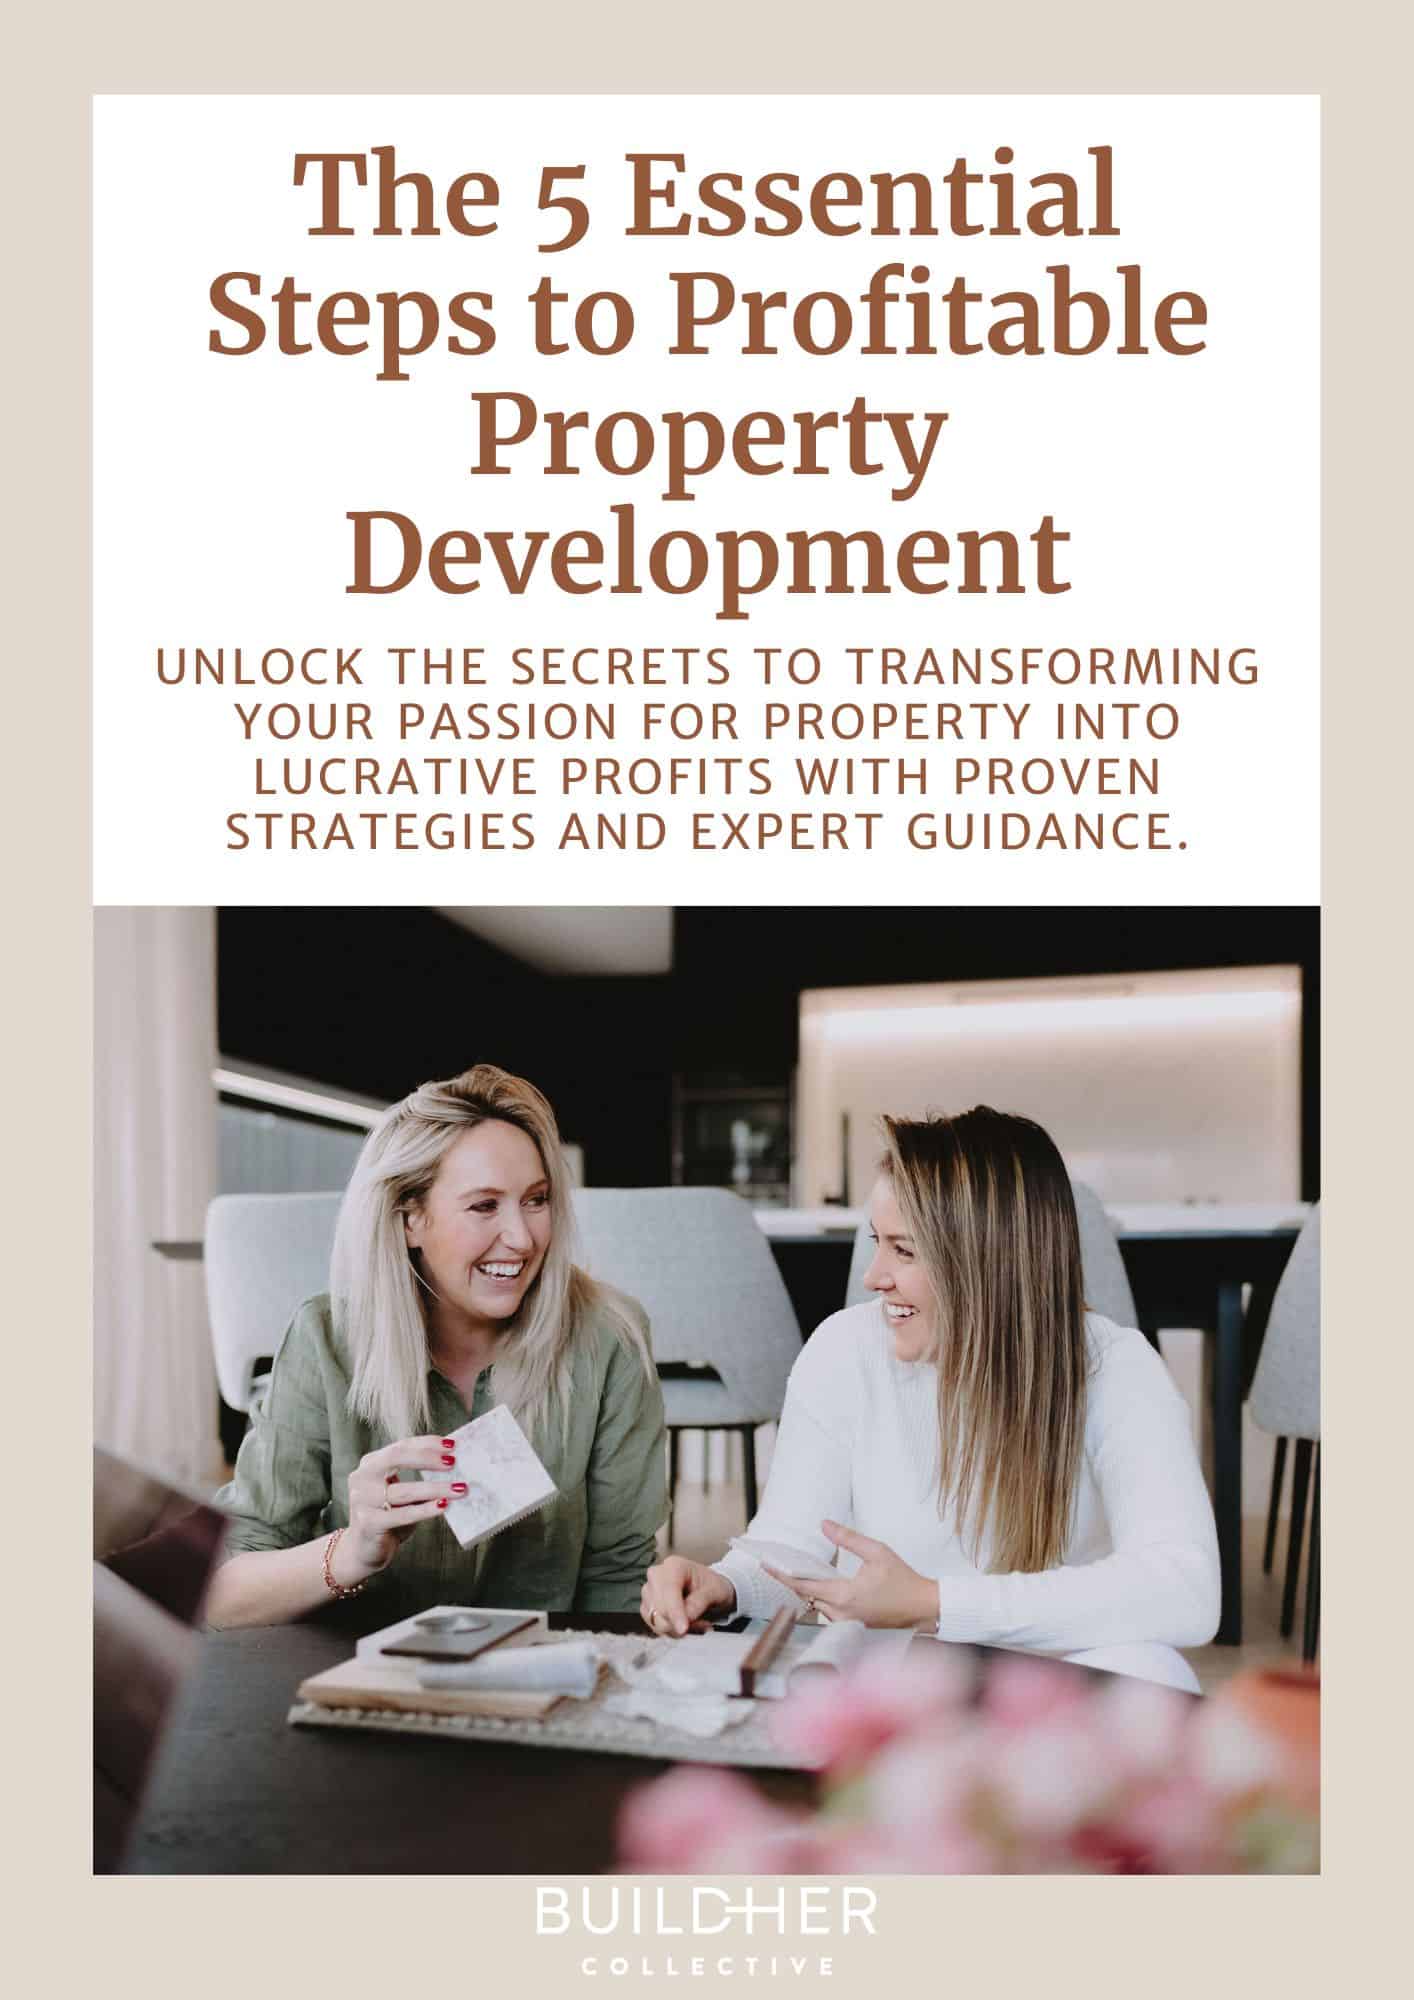 The 5 Essential Steps to Profitable Property Development